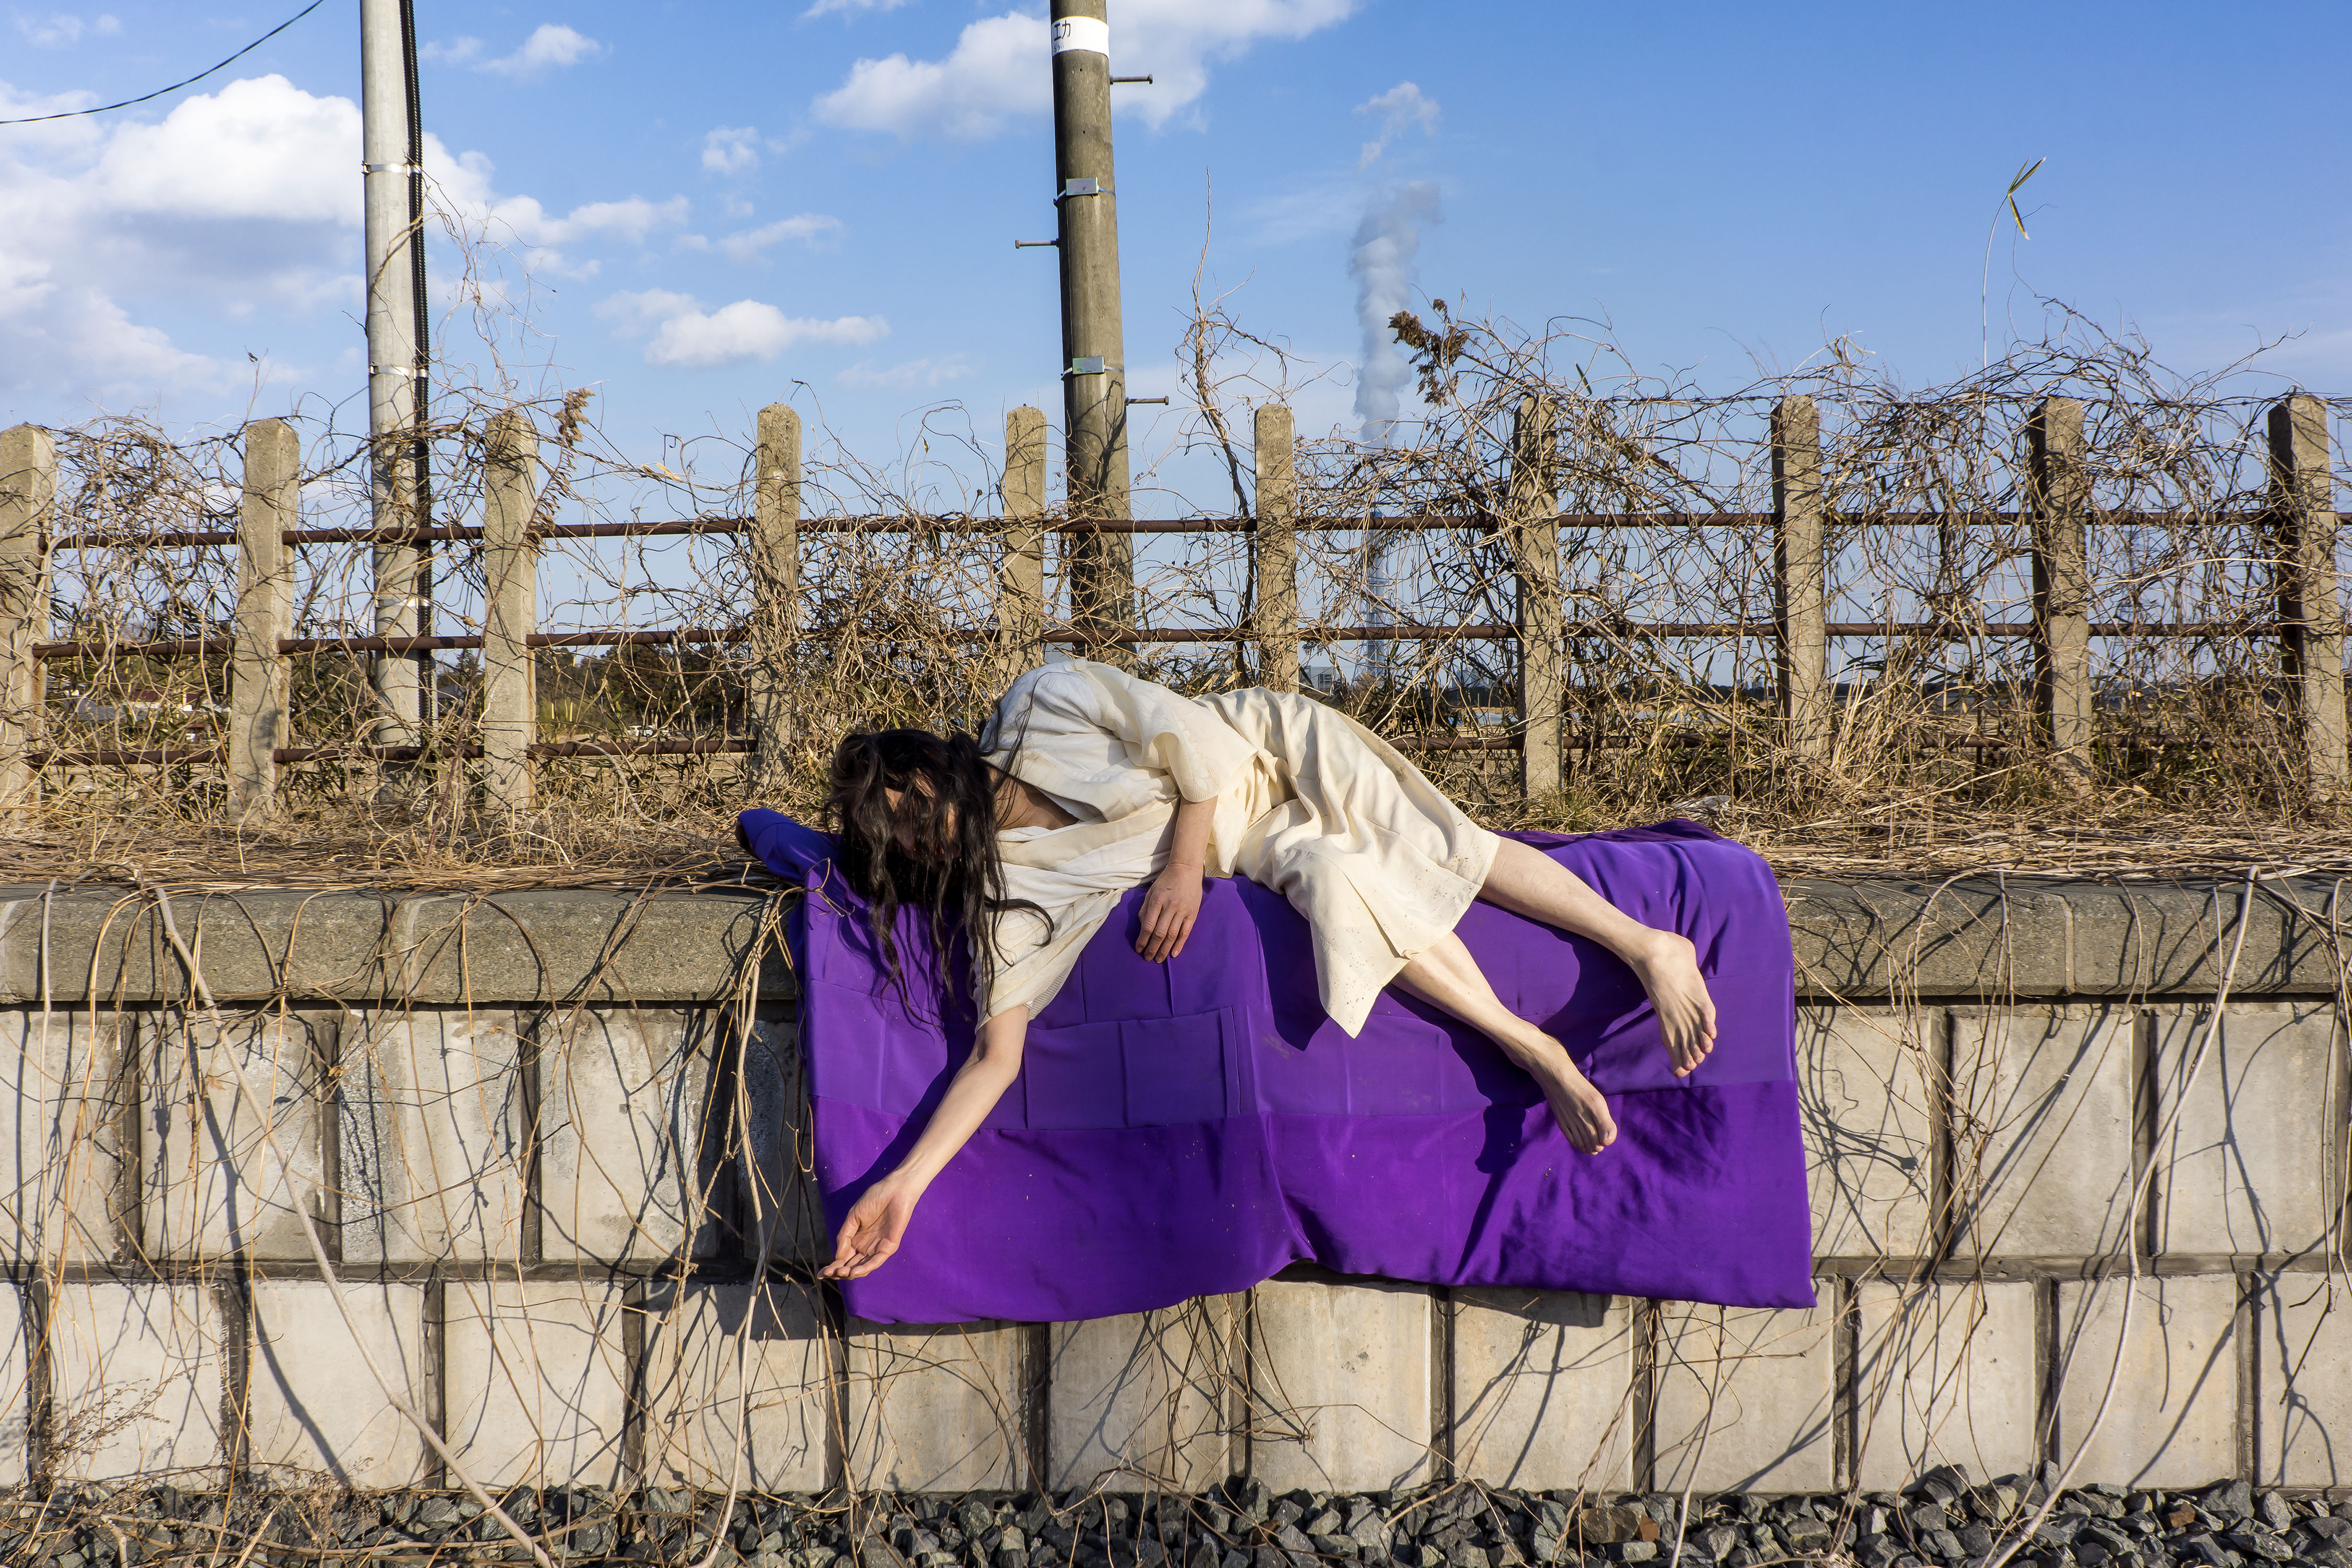 The artist lays draped in an industrial setting of concete with a purple textile underneath her body. She is wearing an off white dress and her body looks limp. 